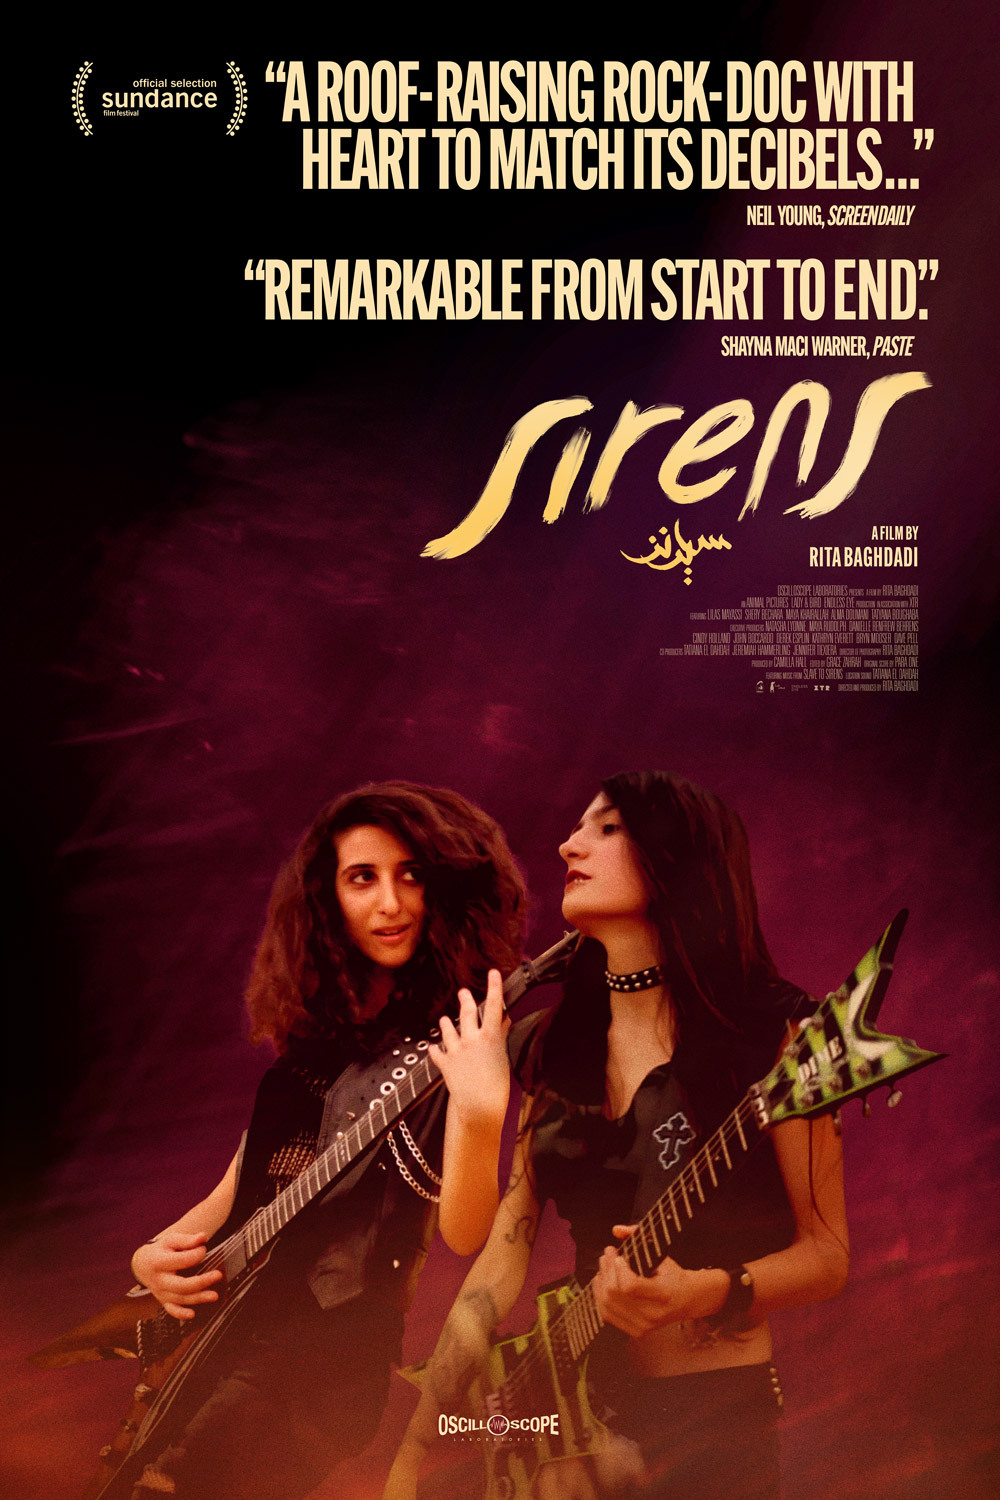 Movie poster for Sirens, two women playing rock guitar